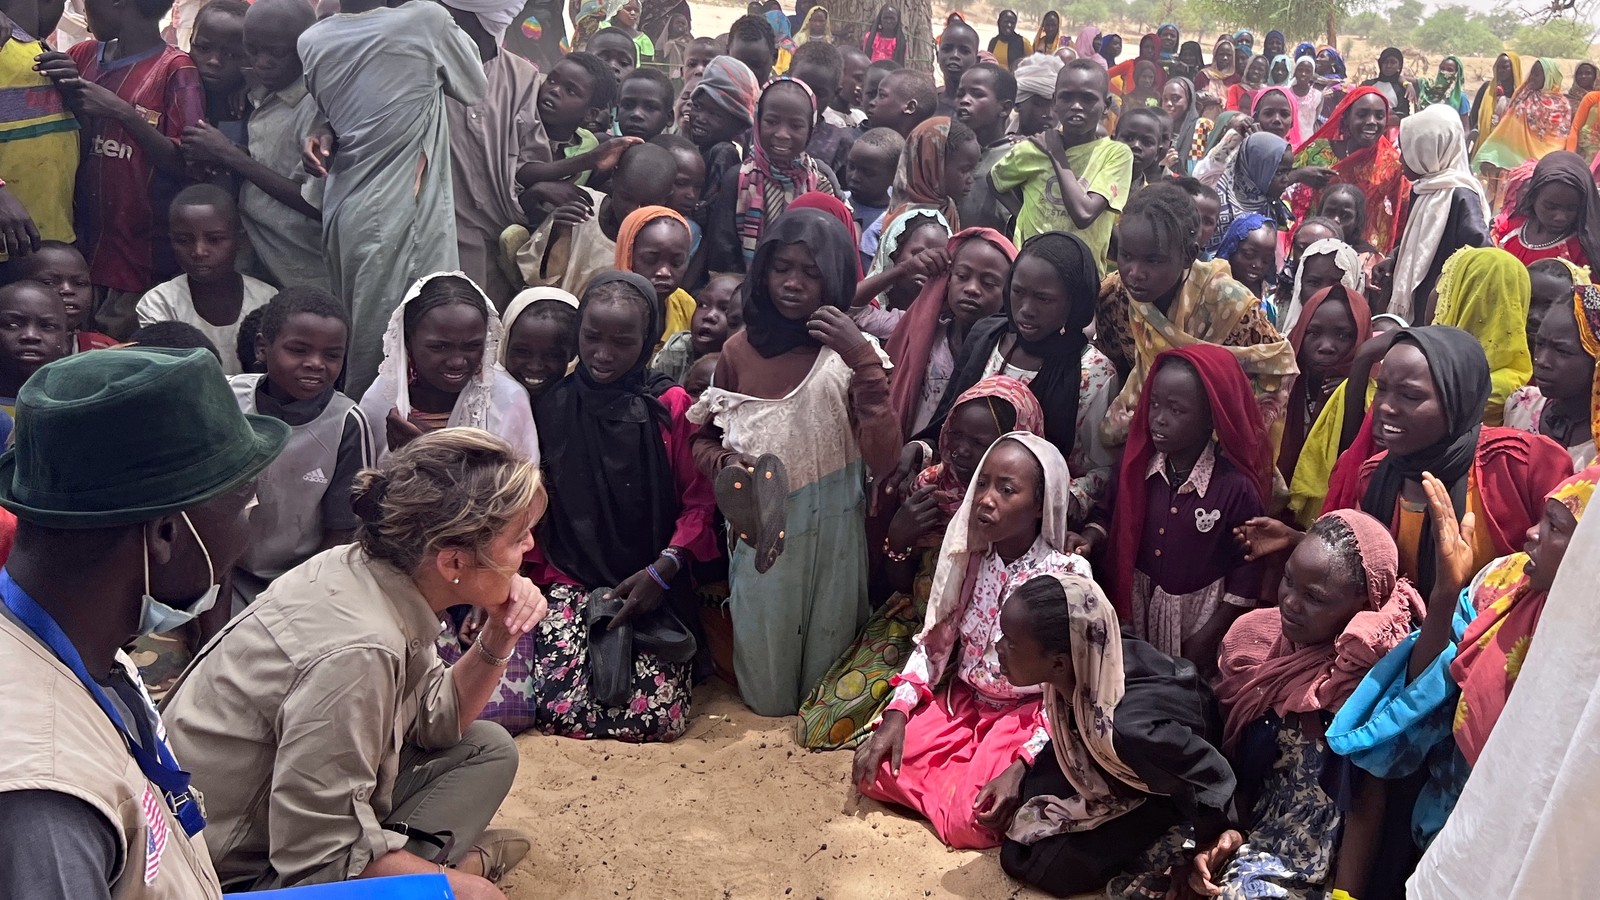 ECW Executive Director talks with women and children in Chad